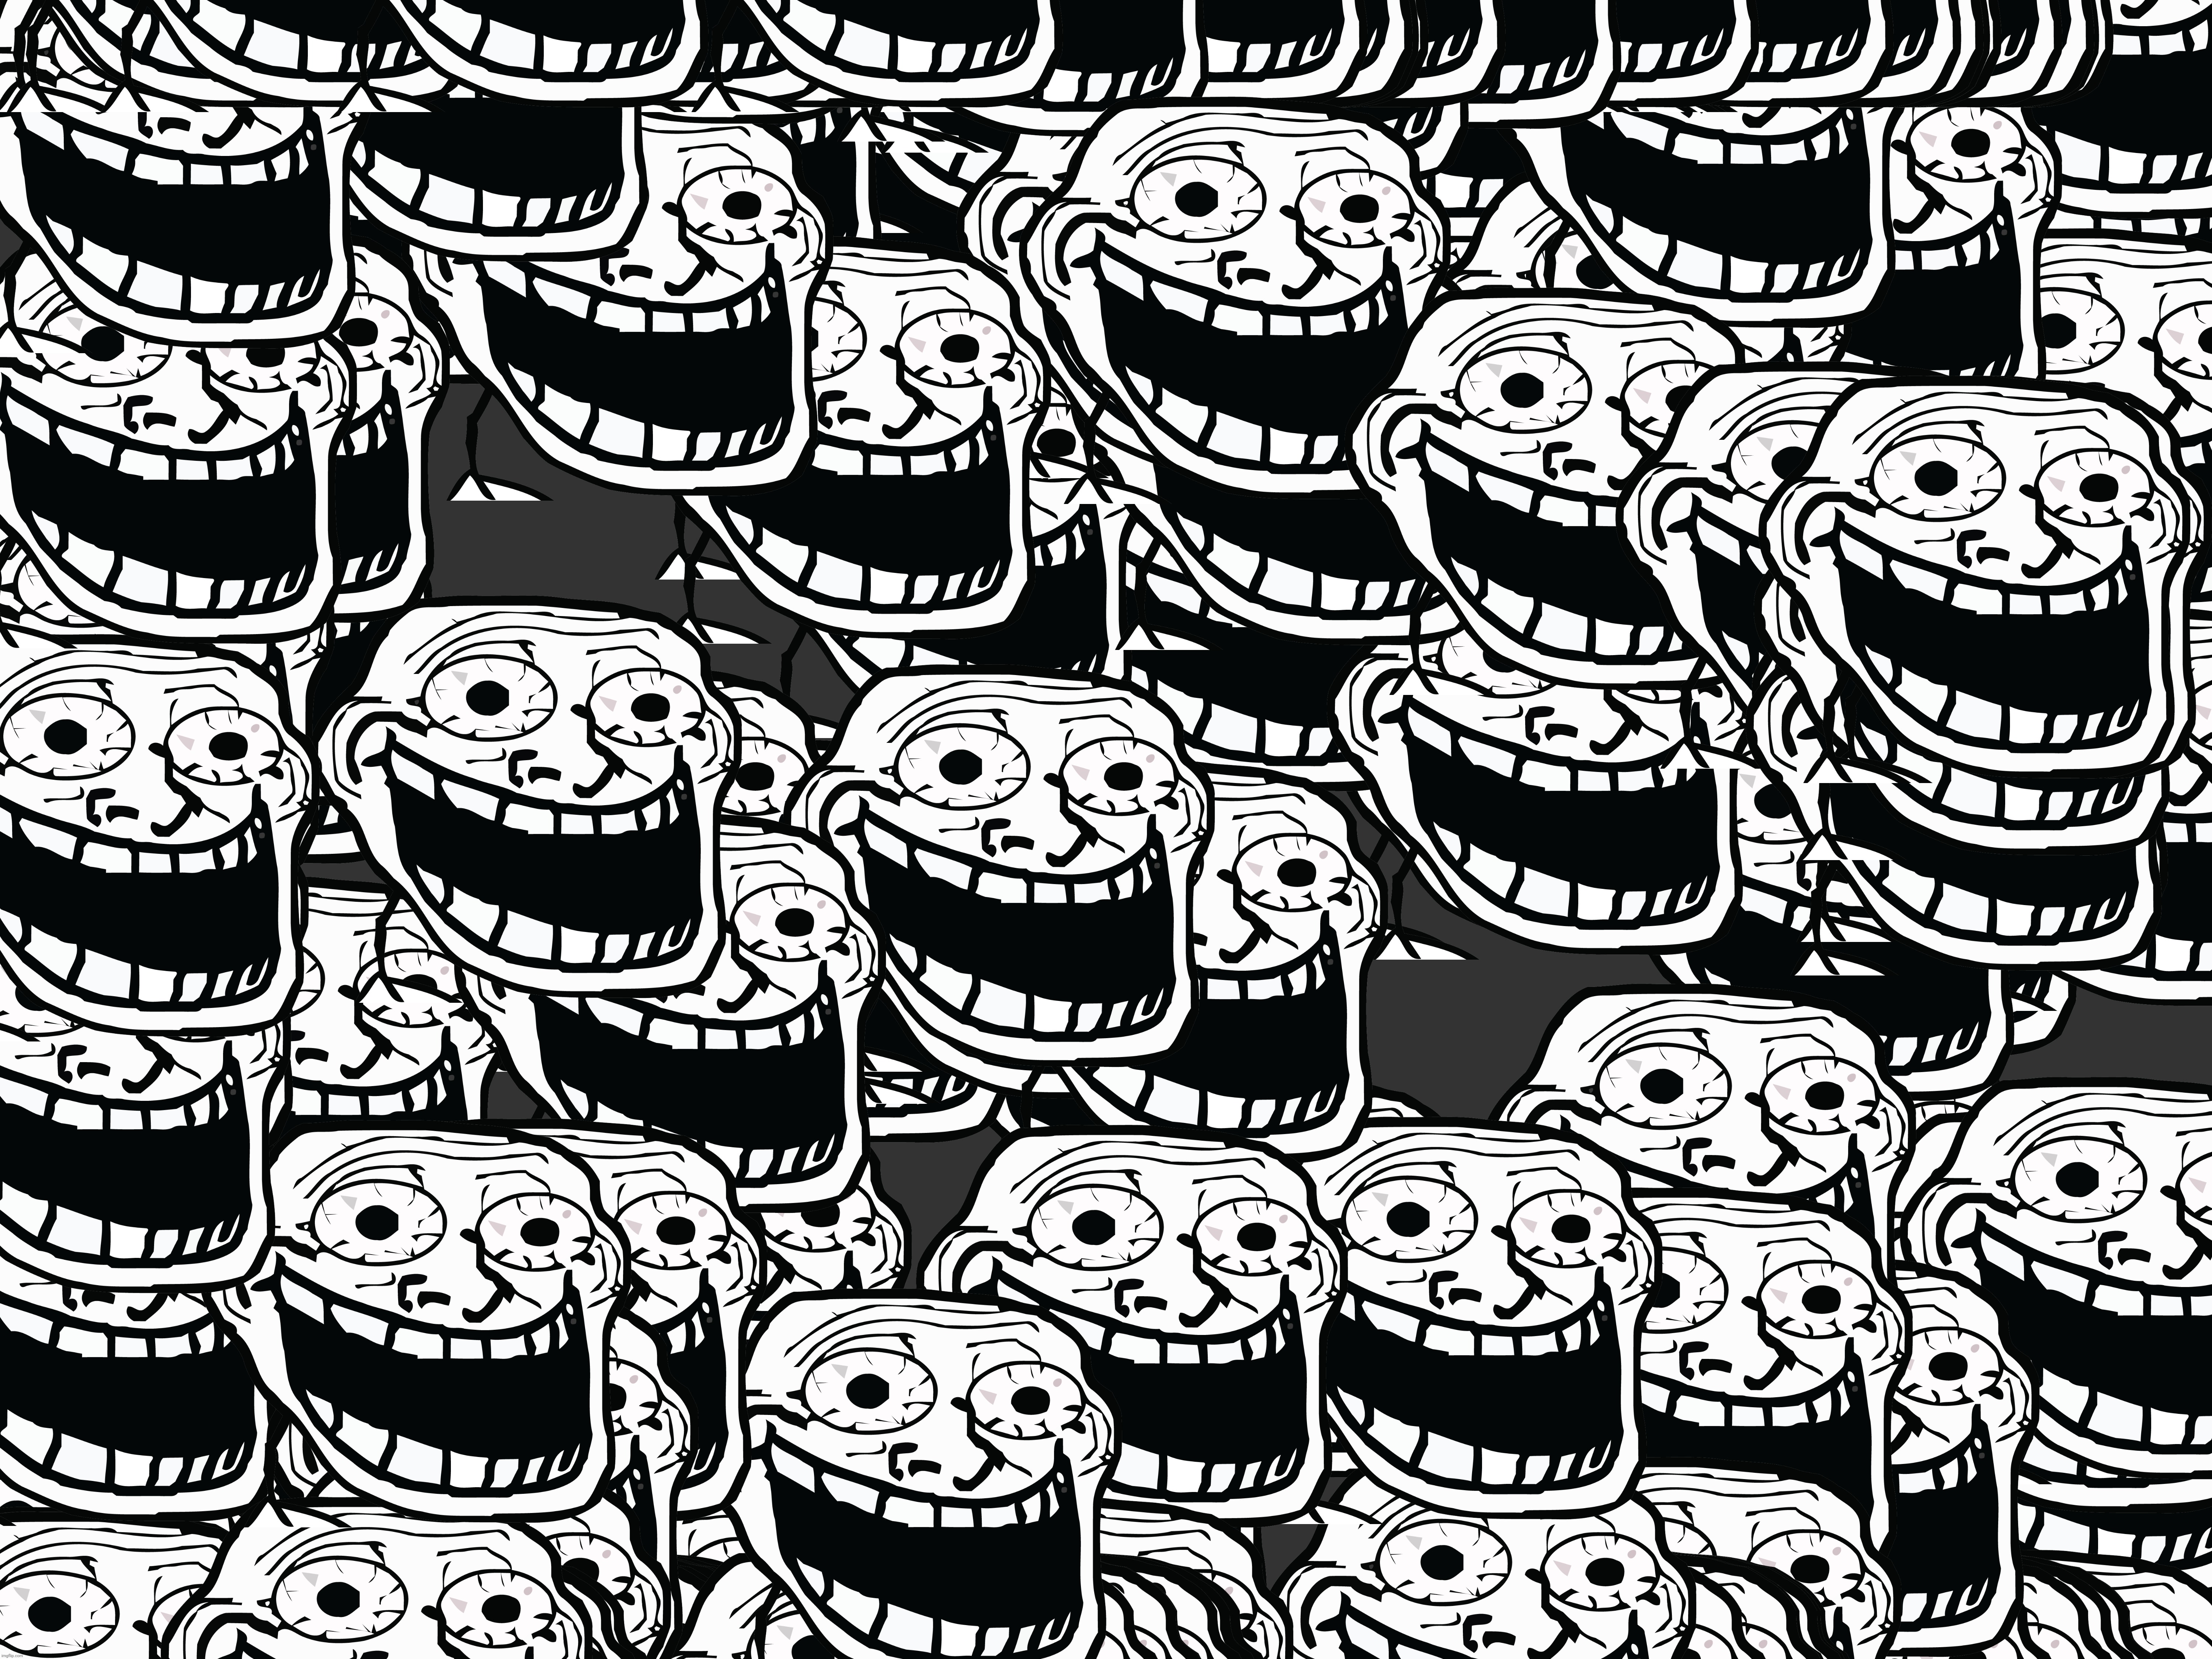 Crazy troll face | image tagged in crazy troll face,crazy trollface | made w/ Imgflip meme maker